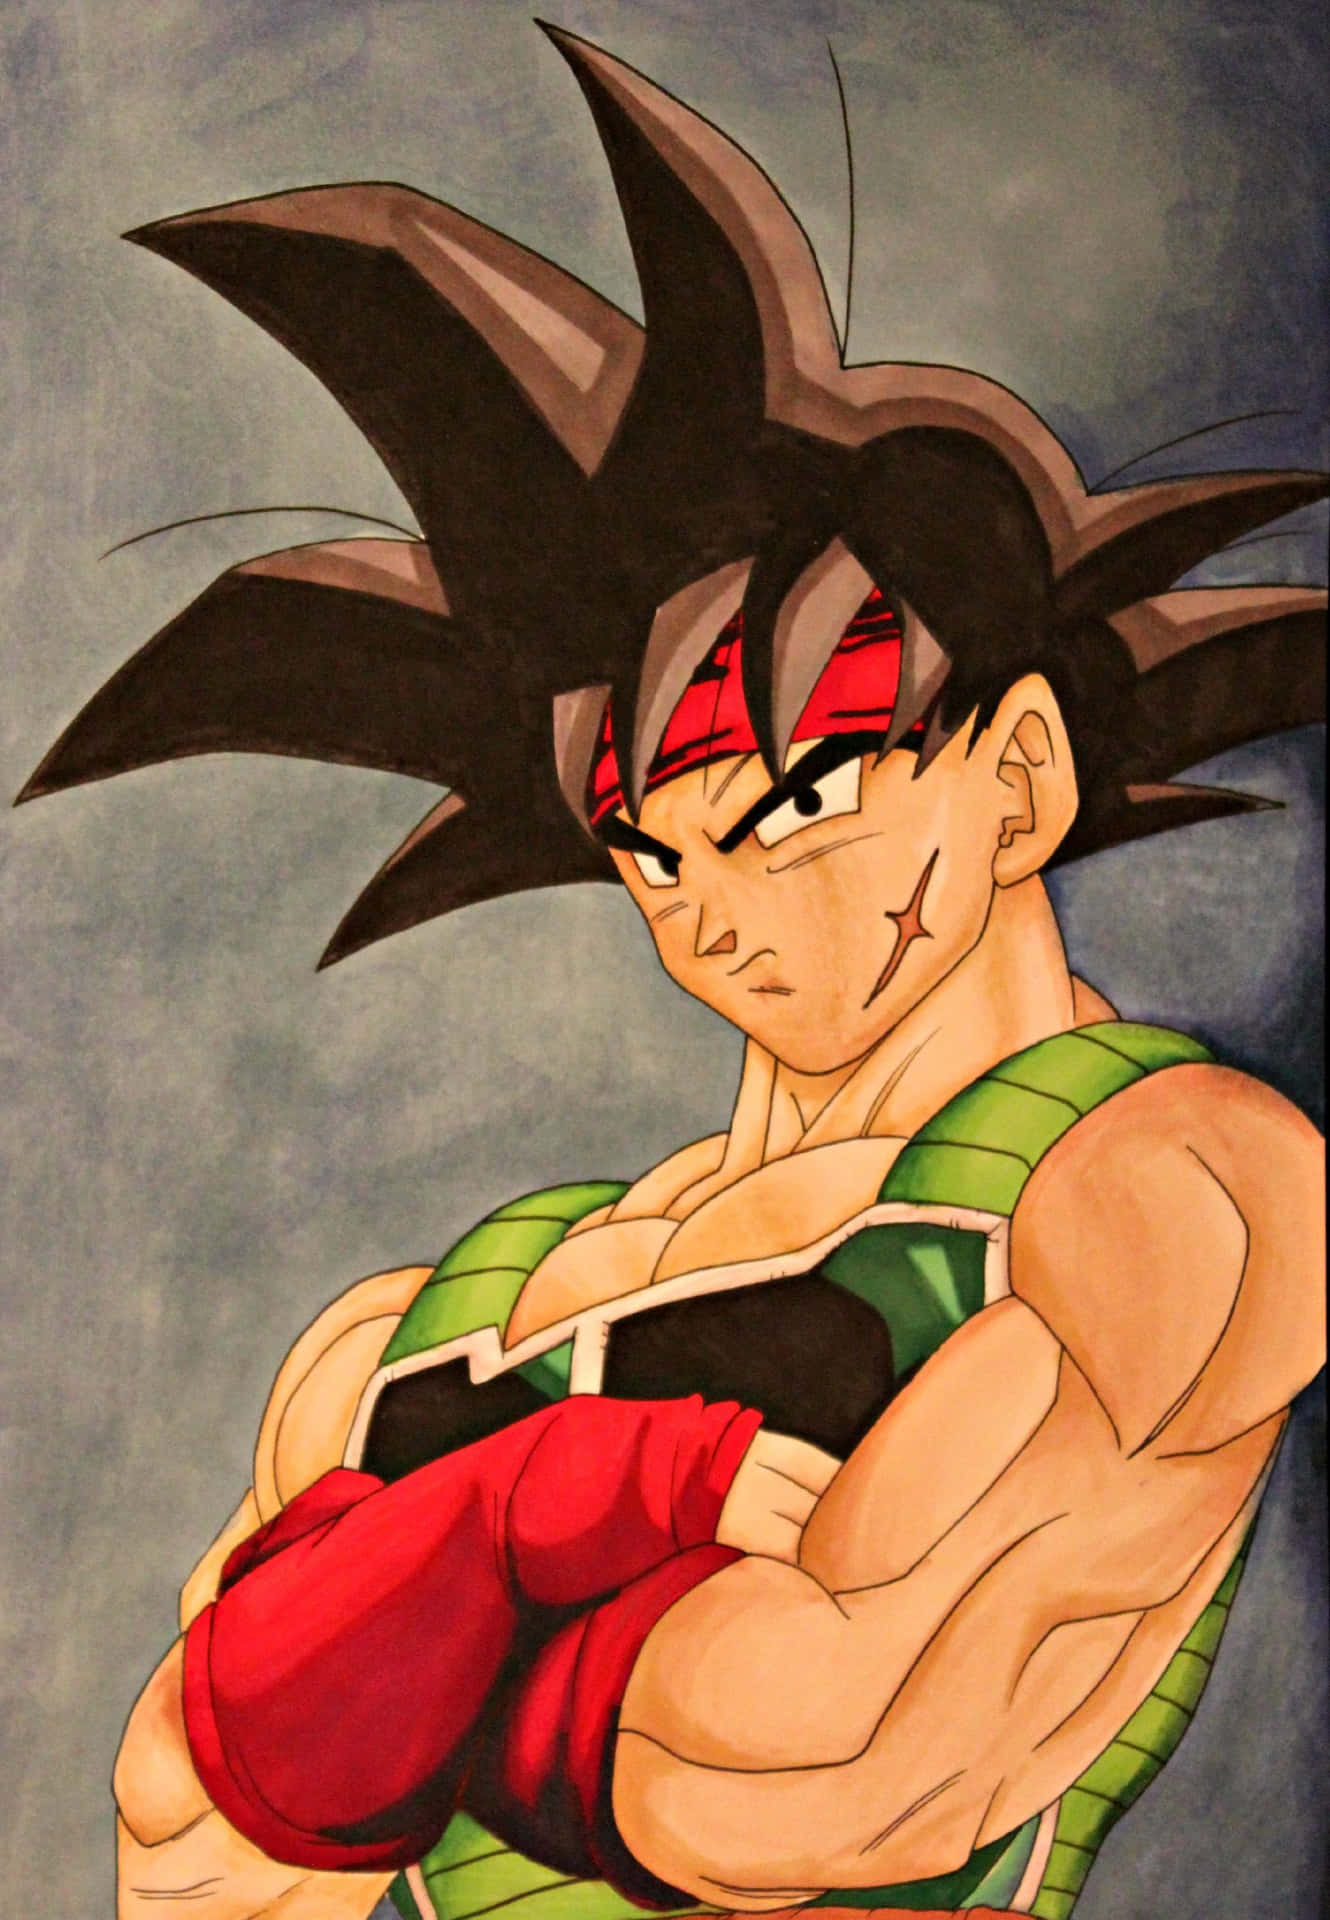 Bardock stands bravely against impossible odds. Wallpaper